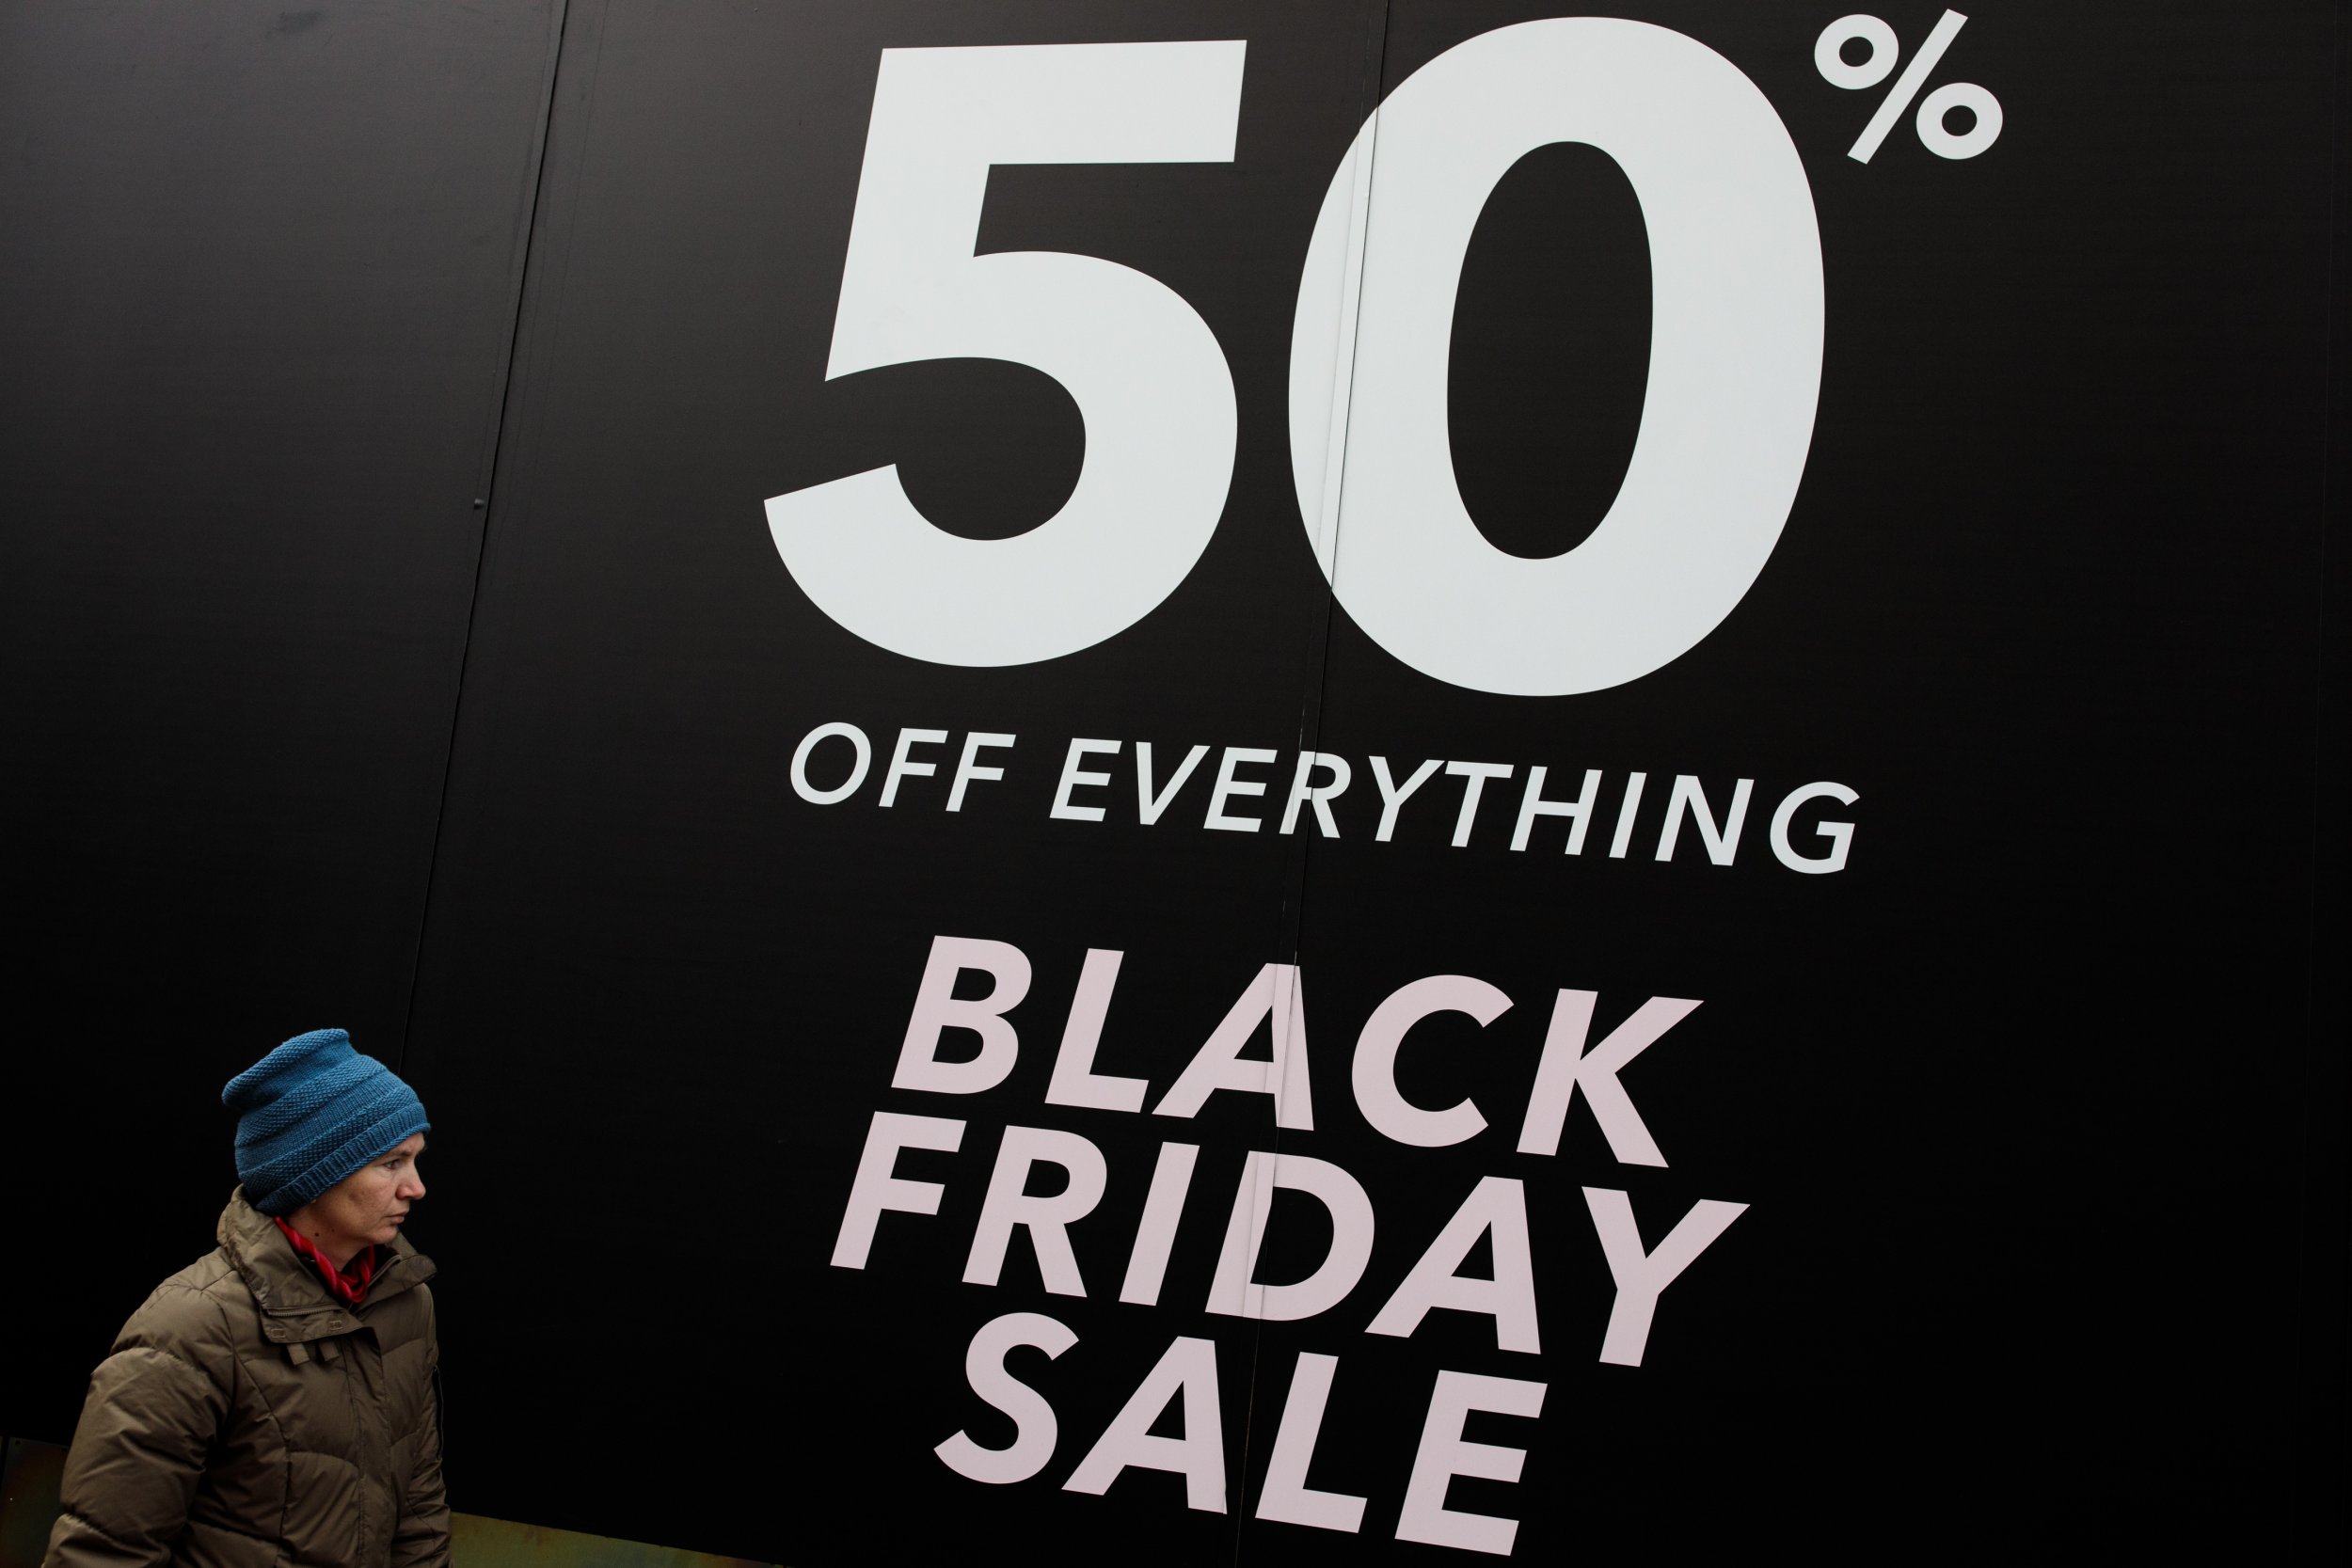 Why Is It Called Black Friday, Cyber Monday? When Are They in 2018? - Will There Be More Deals On Black Friday